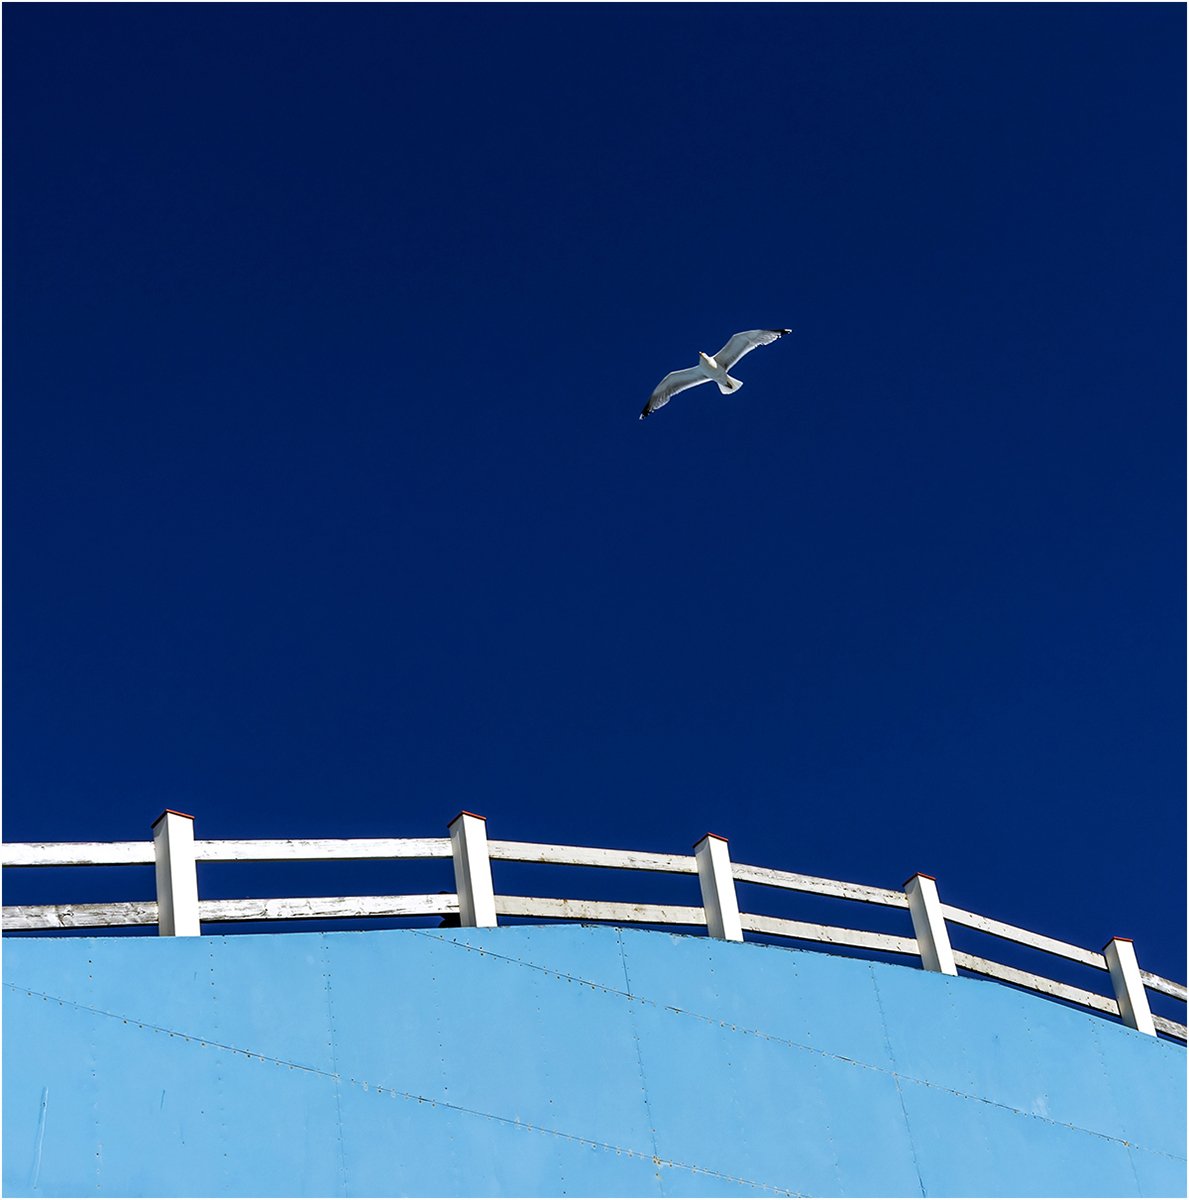 INTO THE BLUE - Clare Lister